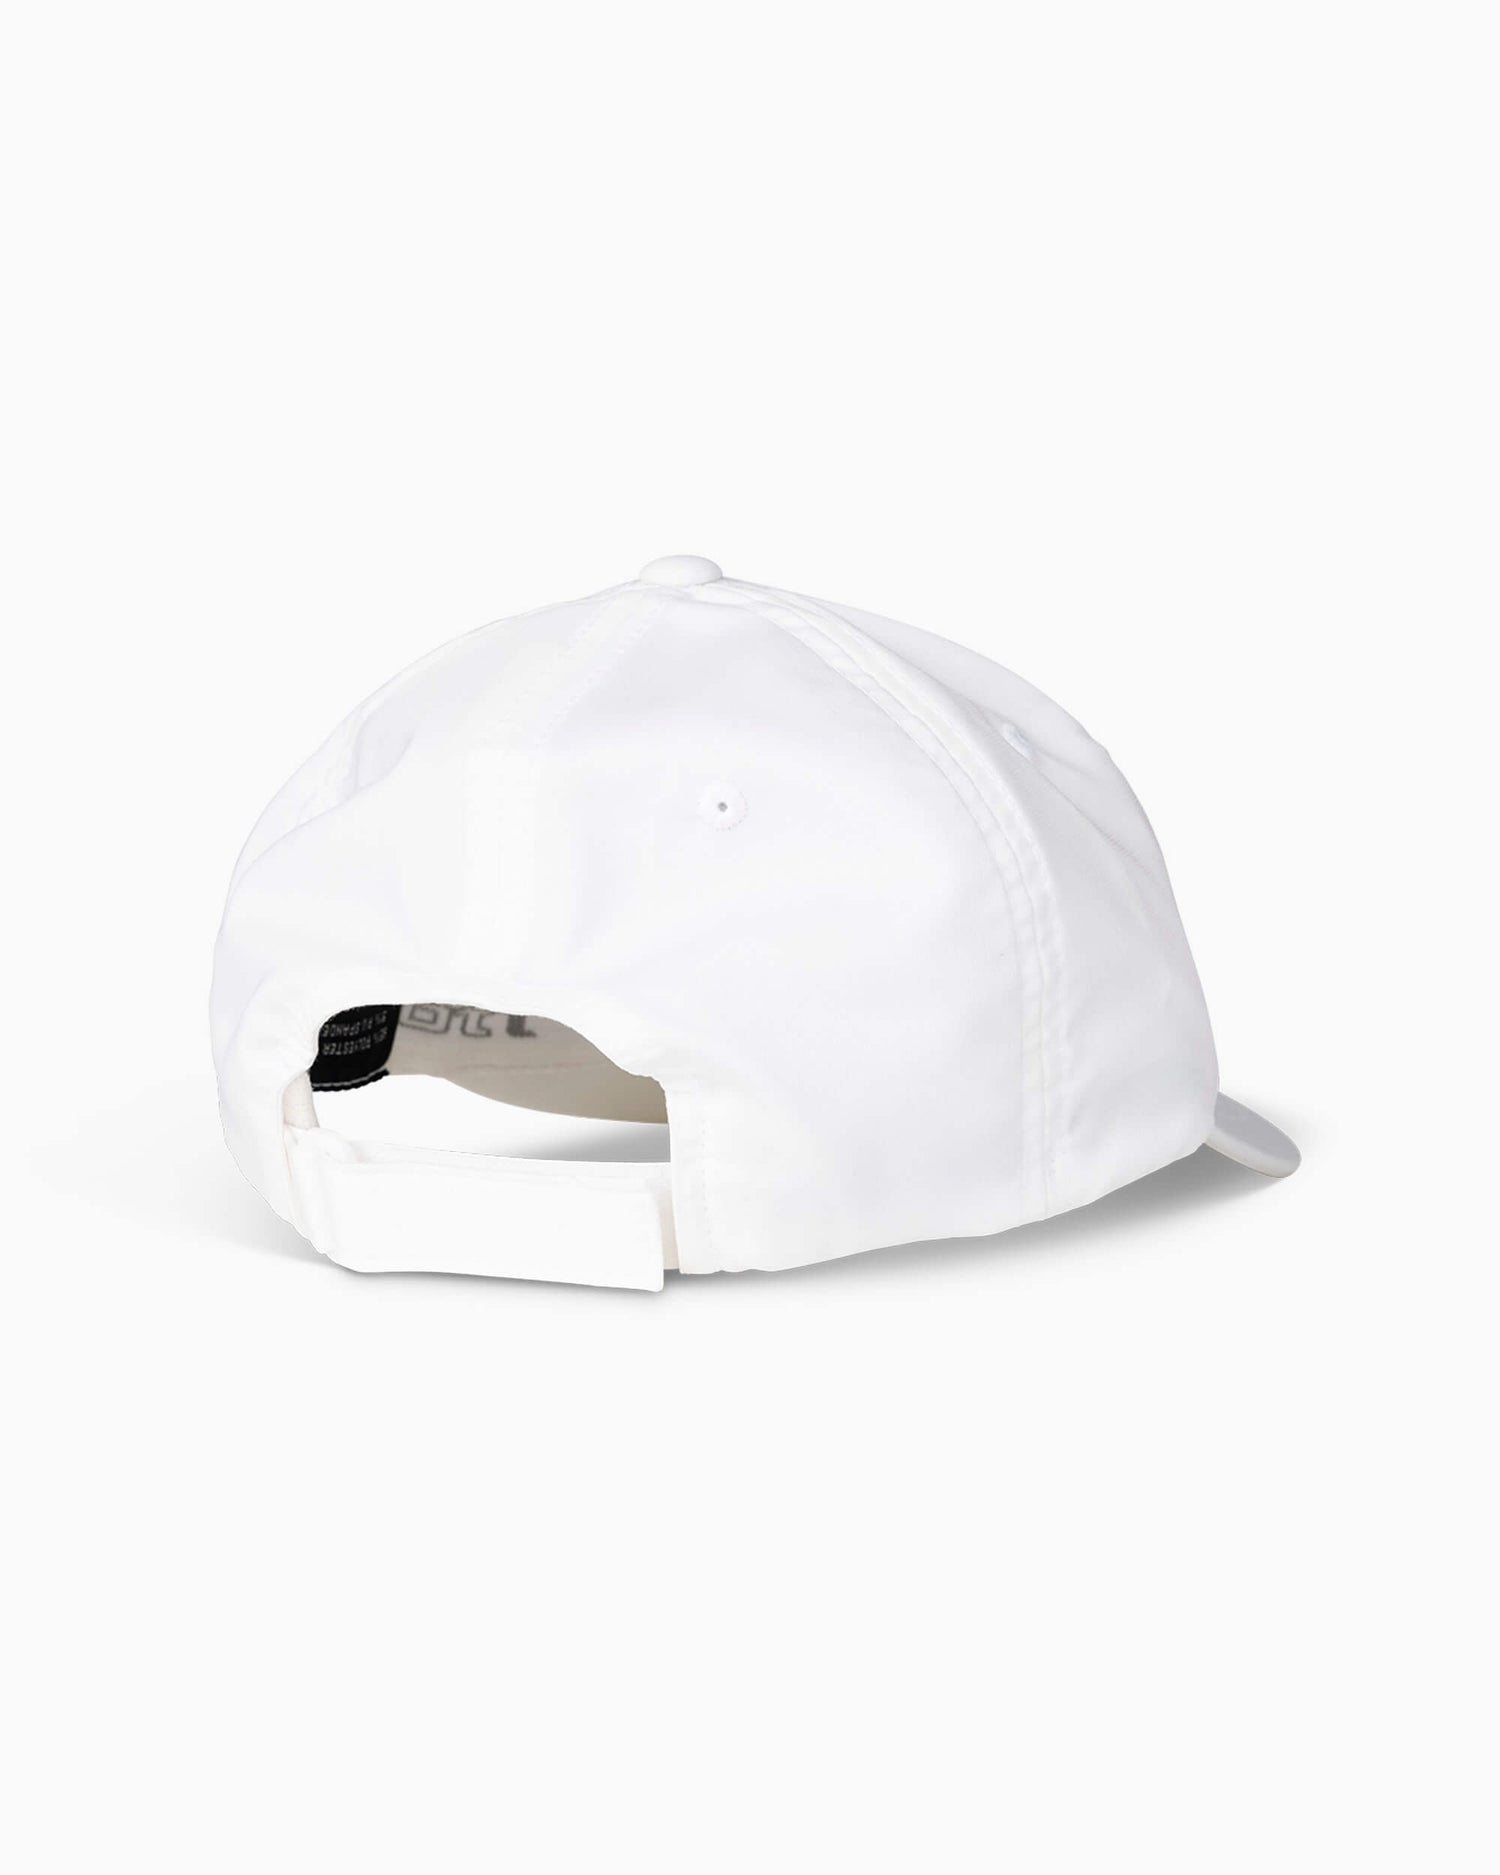 Salty Crew Mujer - Alpha Tech Hat - White